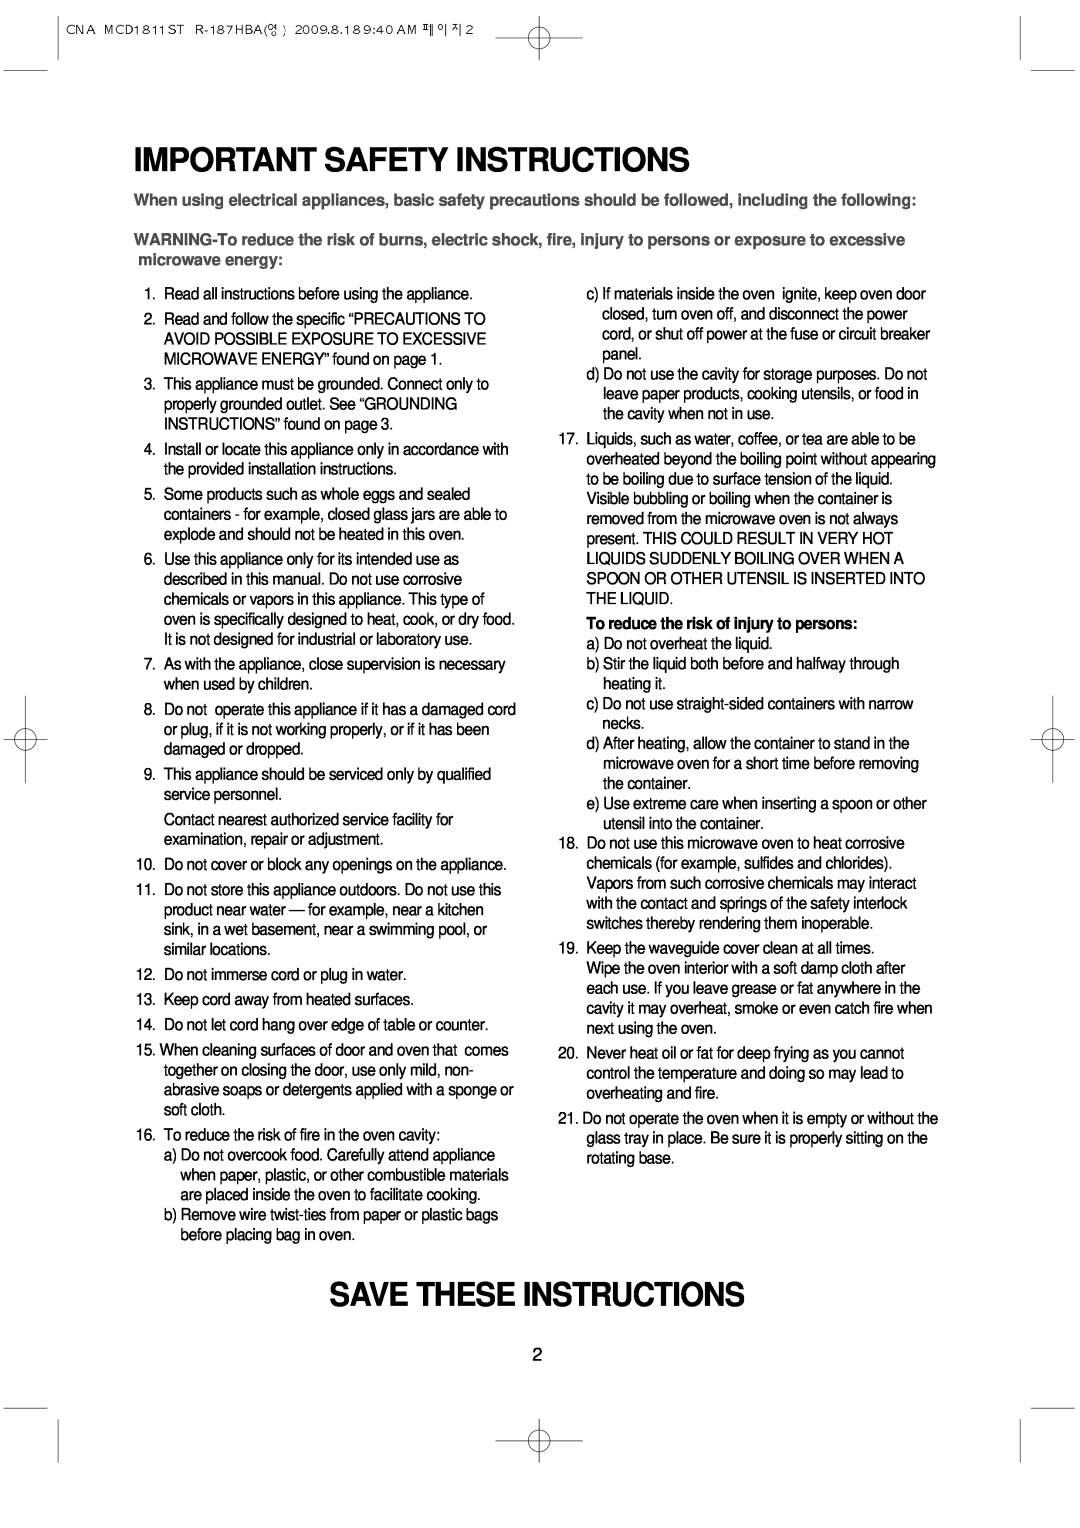 Magic Chef MCD1811ST Important Safety Instructions, Save These Instructions, To reduce the risk of injury to persons 